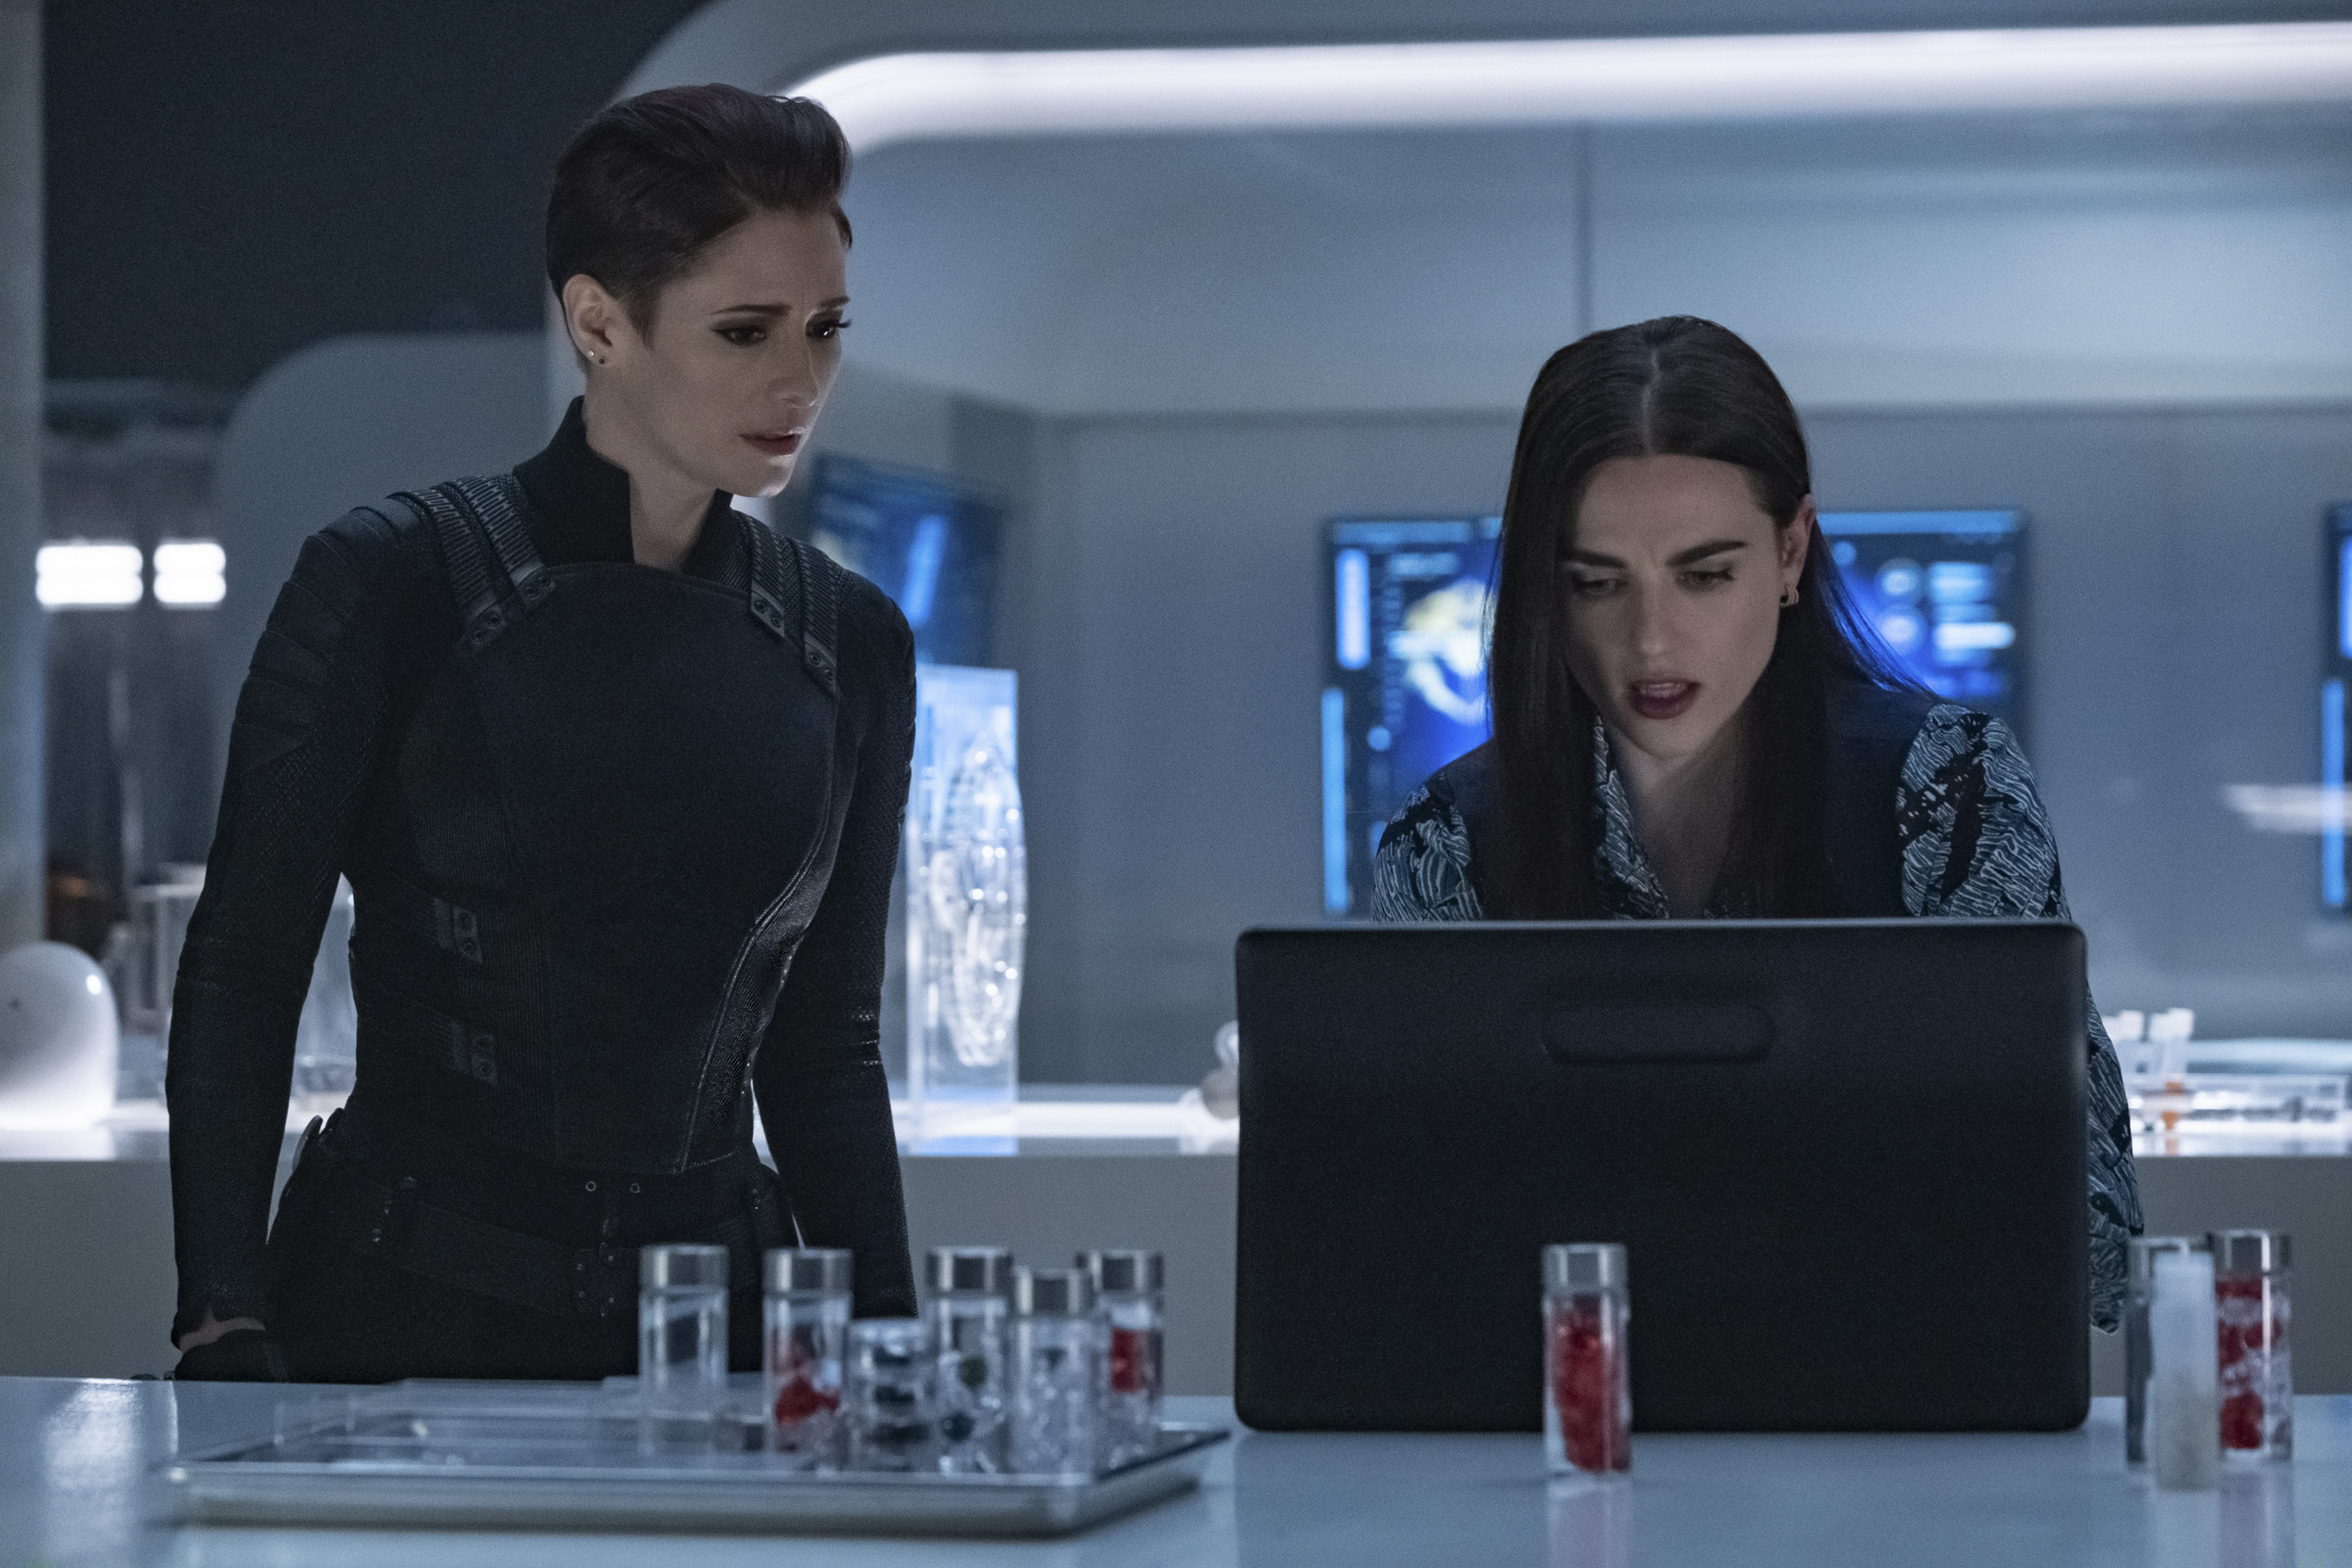 Alex Danvers and Lena Luthor in the lab